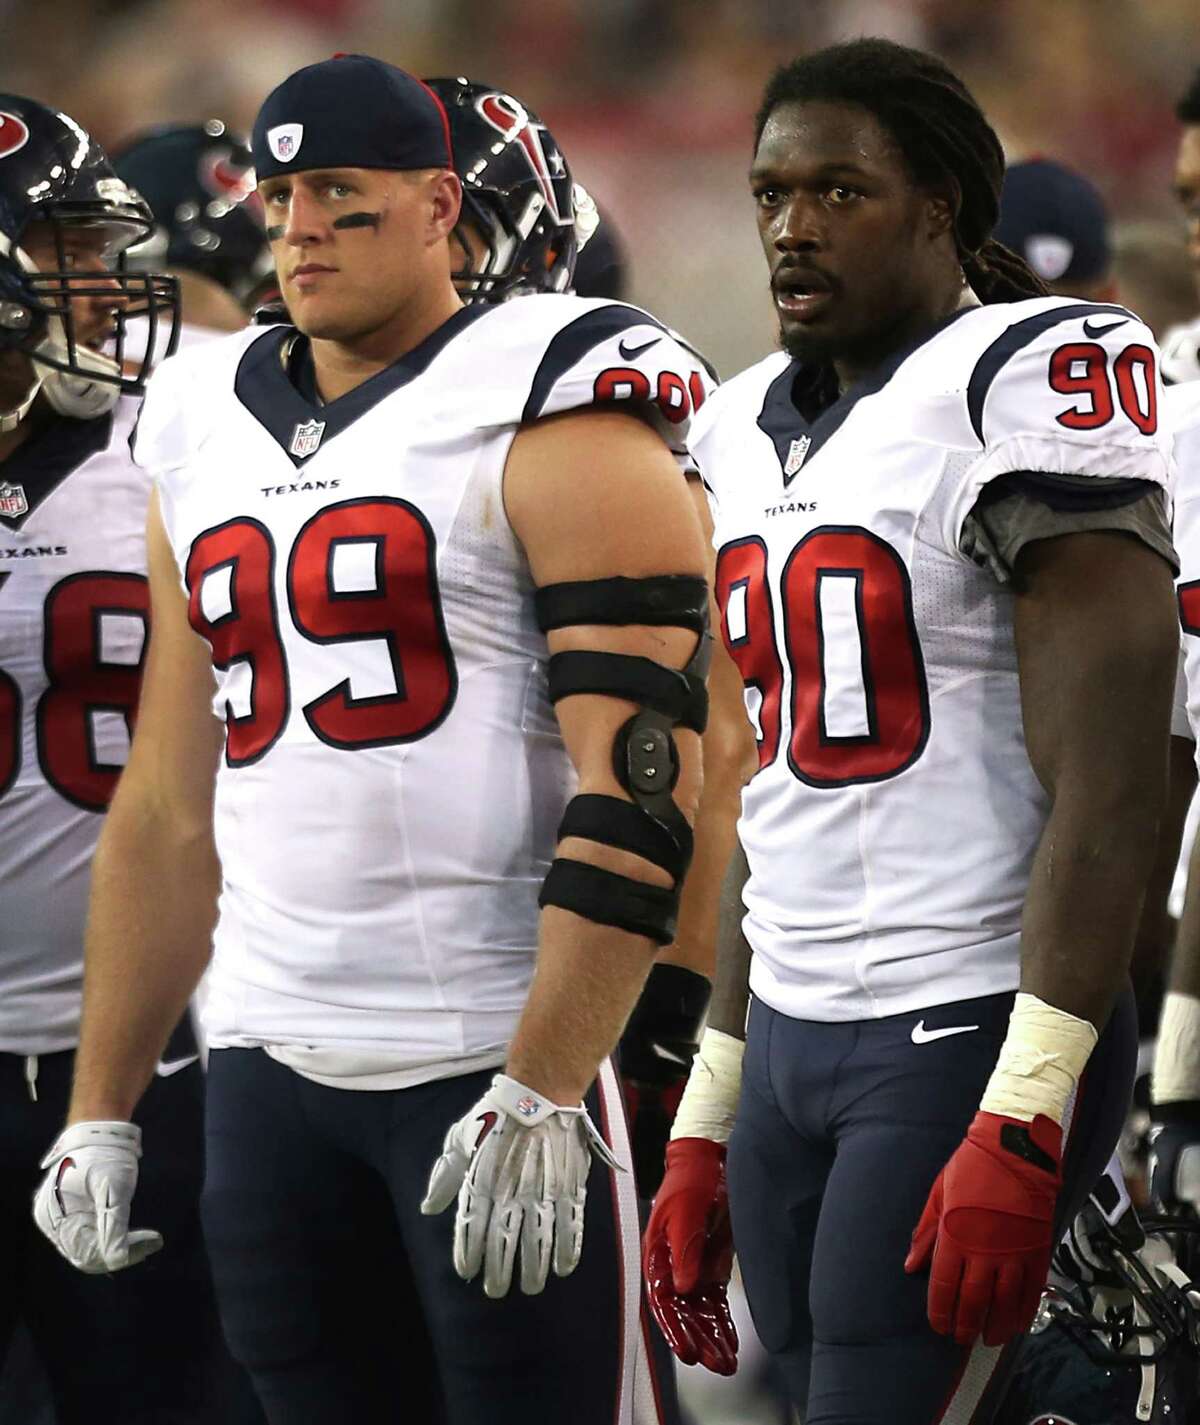 Houston Texans defensive end J.J. Watt (99) and linebacker Jadeveon Clowney (90) stand on the sidelines during the second quarter of an NFL pre-season football game against the Arizona Cardinals at University of Phoenix Stadium Saturday, Aug. 9, 2014, in Glendale, Ariz. ( Brett Coomer / Houston Chronicle )